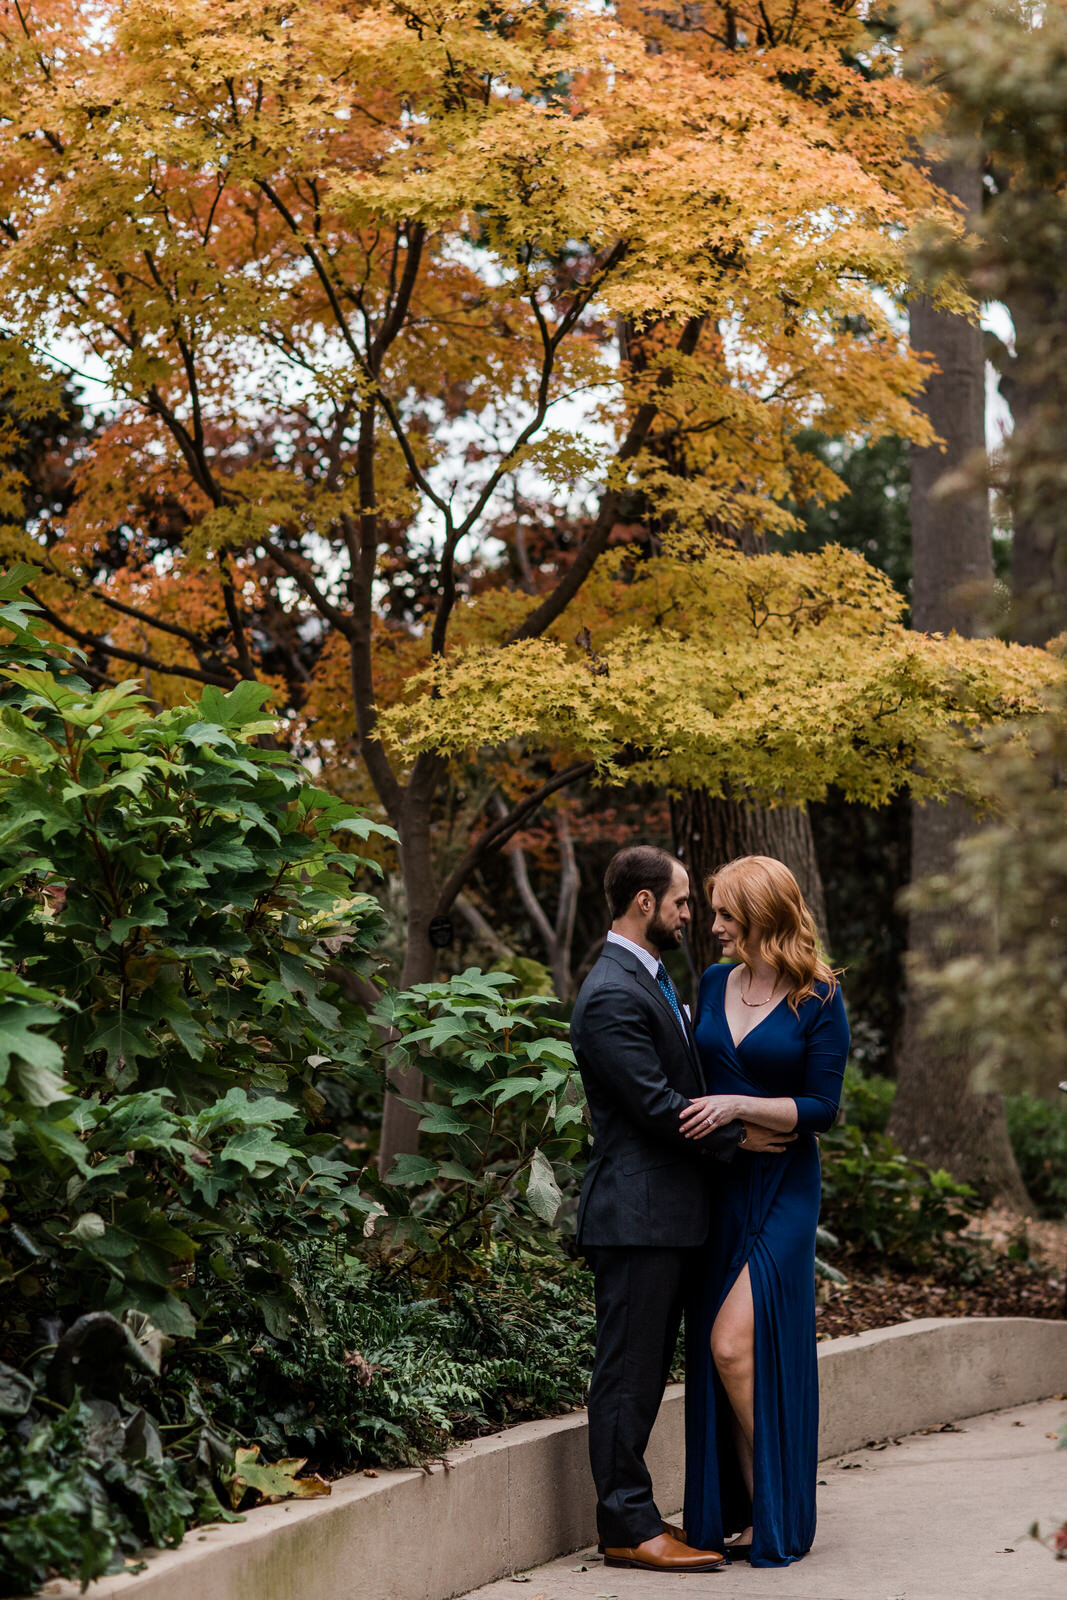 Fall engagement photoshoot at the Dallas Arboretum